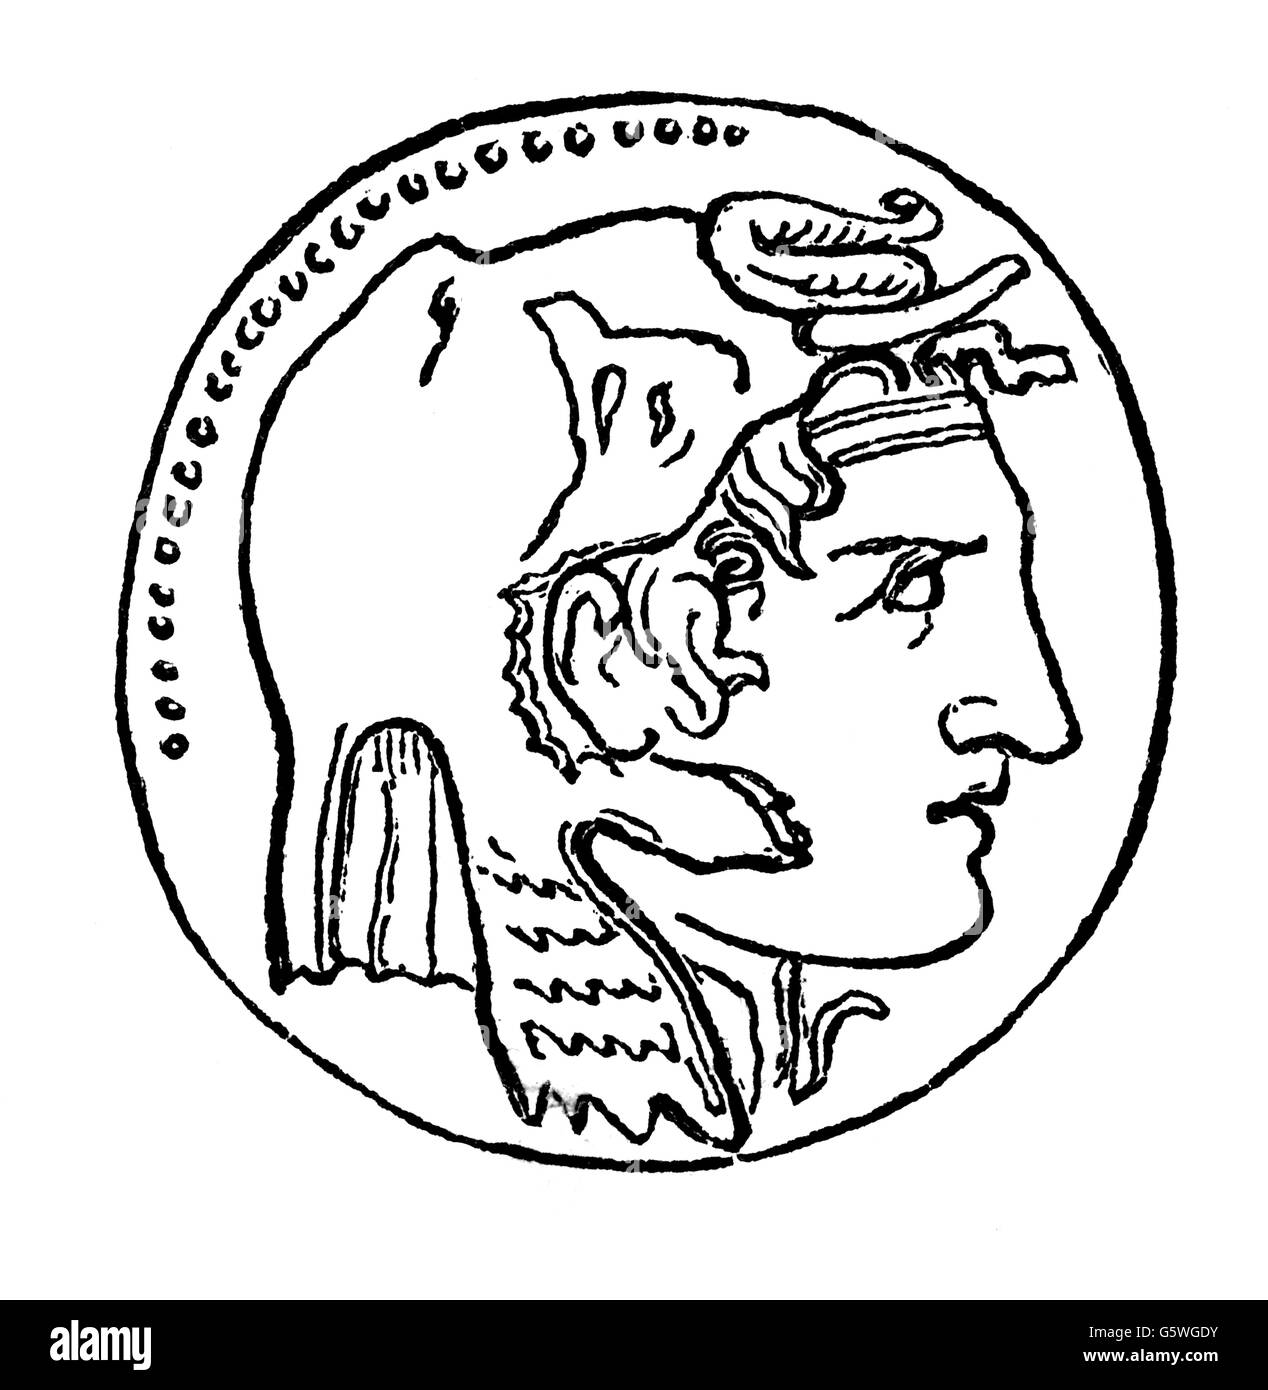 money / finances, coins, Greece, coin, with head of Alexander Great as conquerer of India, coined by Ptolemy I, Egypt, 4th century BC, wood engraving,  from: book of inventions, trades and industries, Otto Spamer publishing house, Leipzig - Berlin, 1864 - 1867, Additional-Rights-Clearences-Not Available Stock Photo